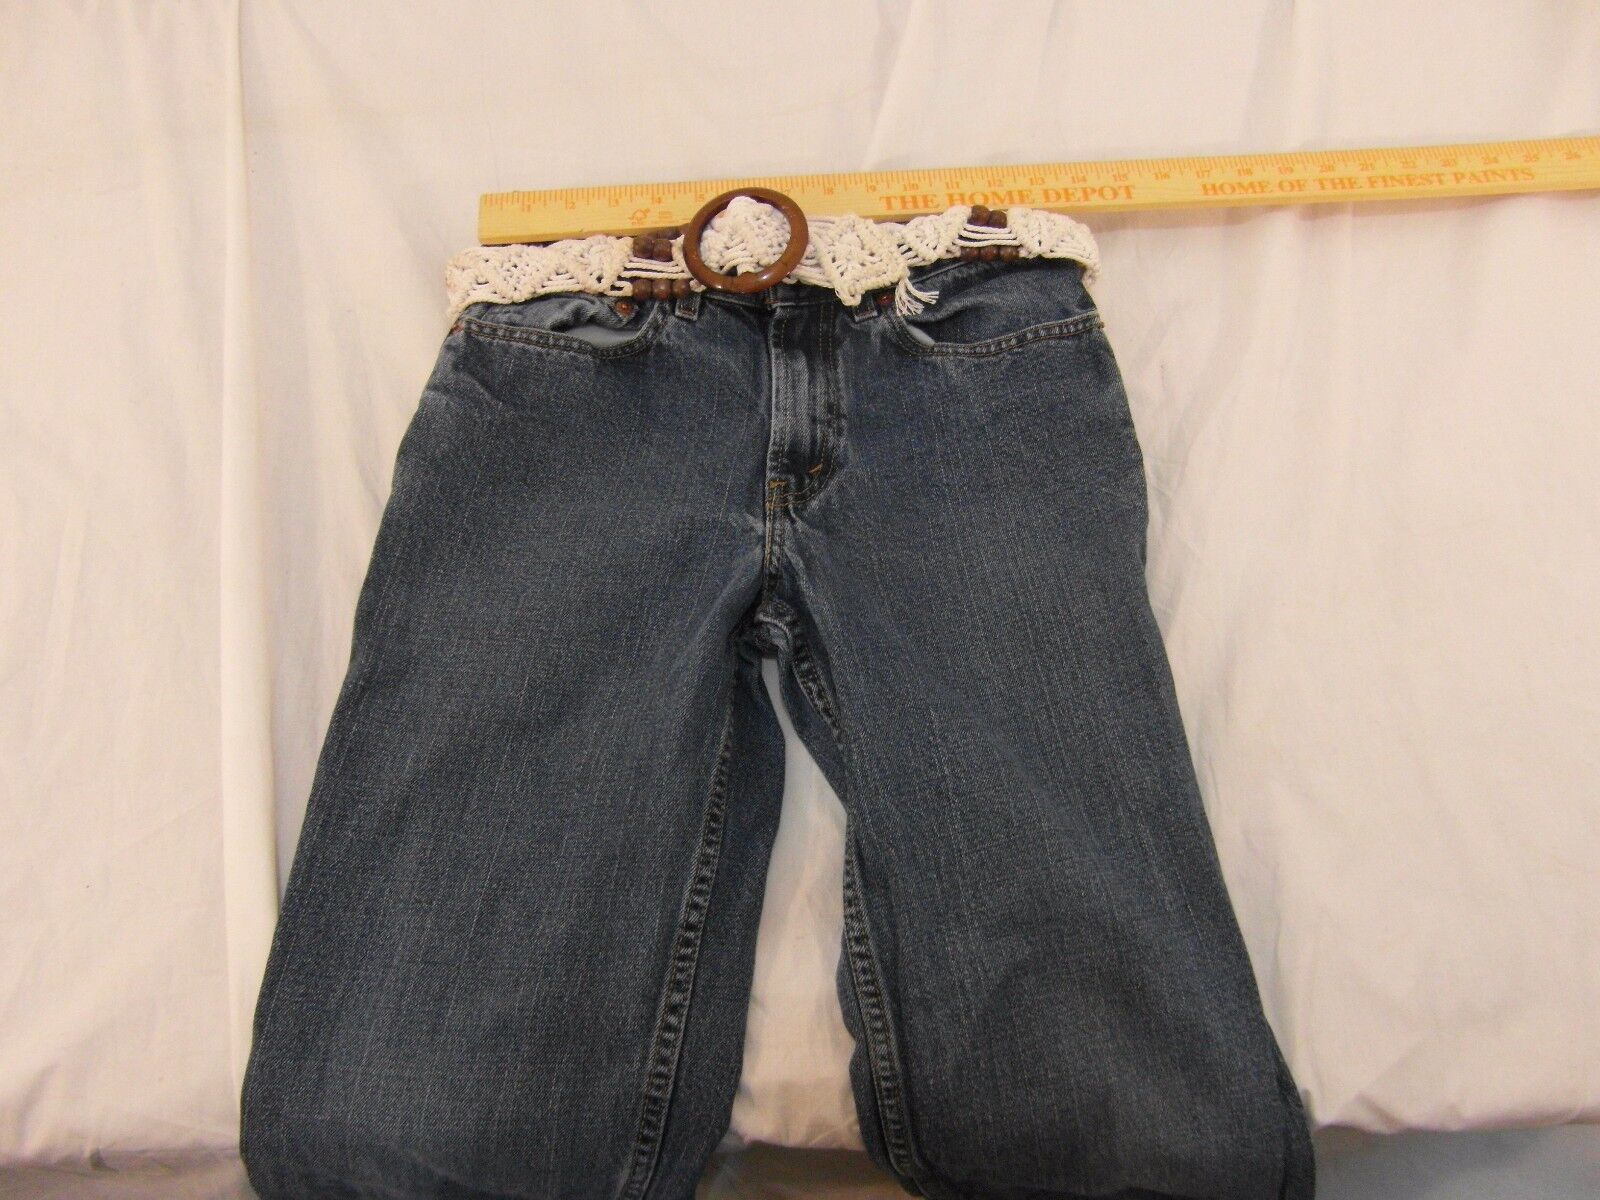 Children Youth Unisex Levi's 550 Relaxed Fit 16 Slim With Braided Belt 32560 - $20.24